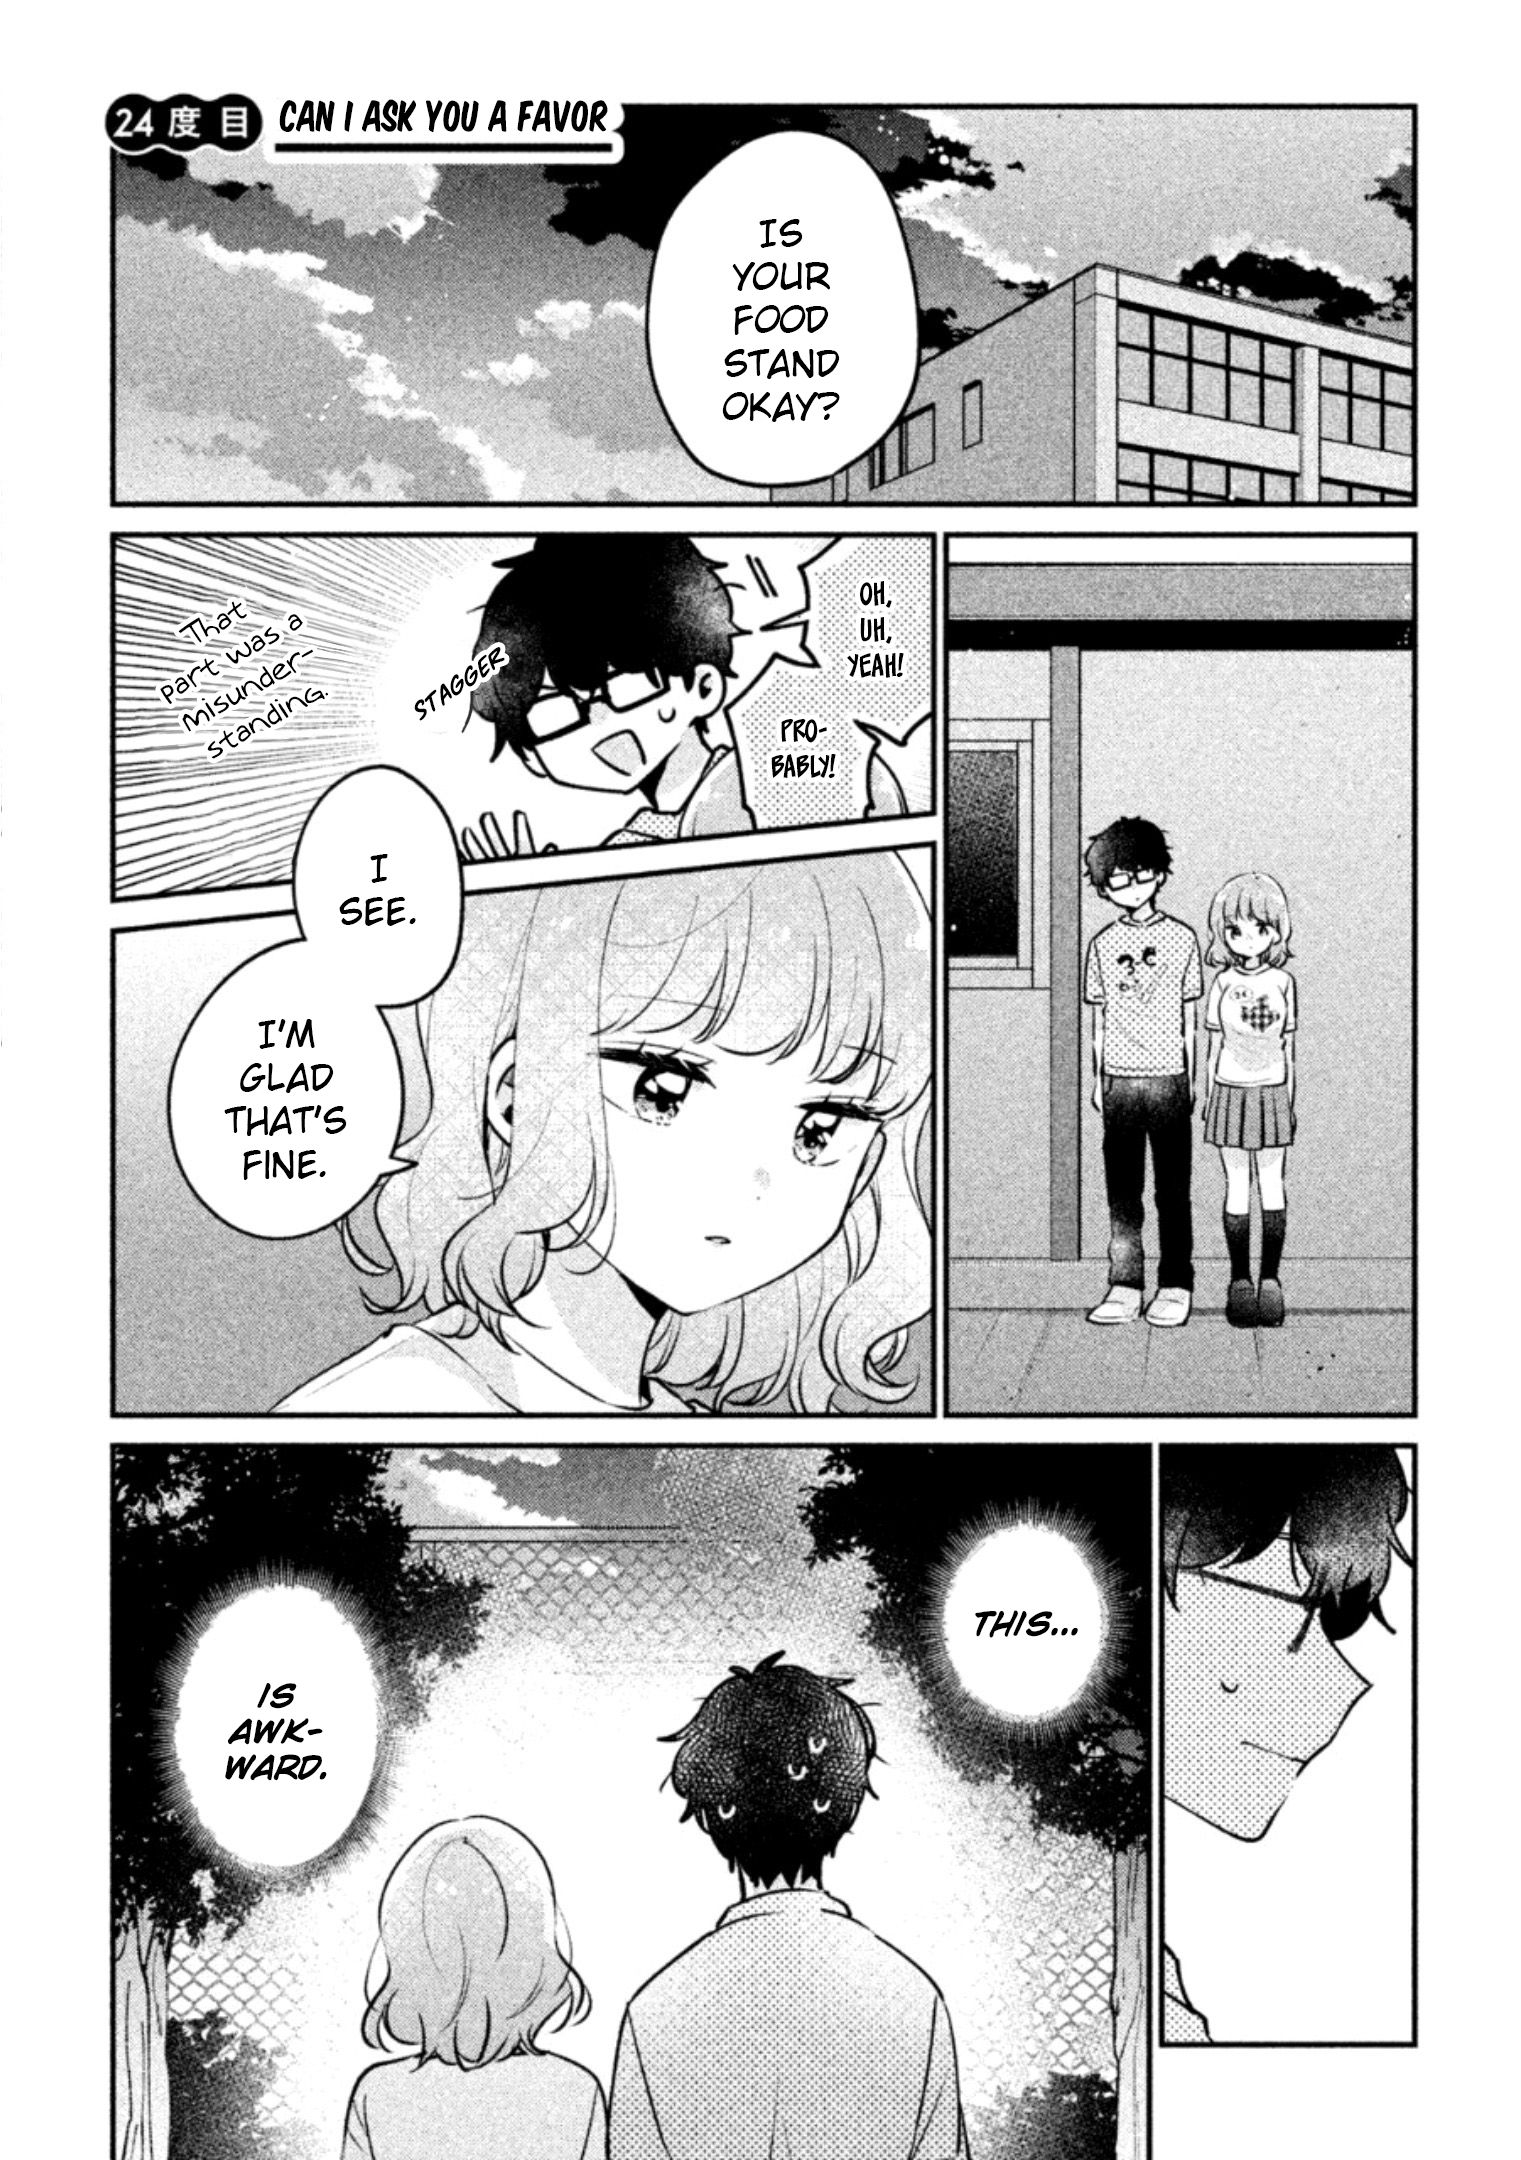 It's Not Meguro-san's First Time - chapter 24 - #2